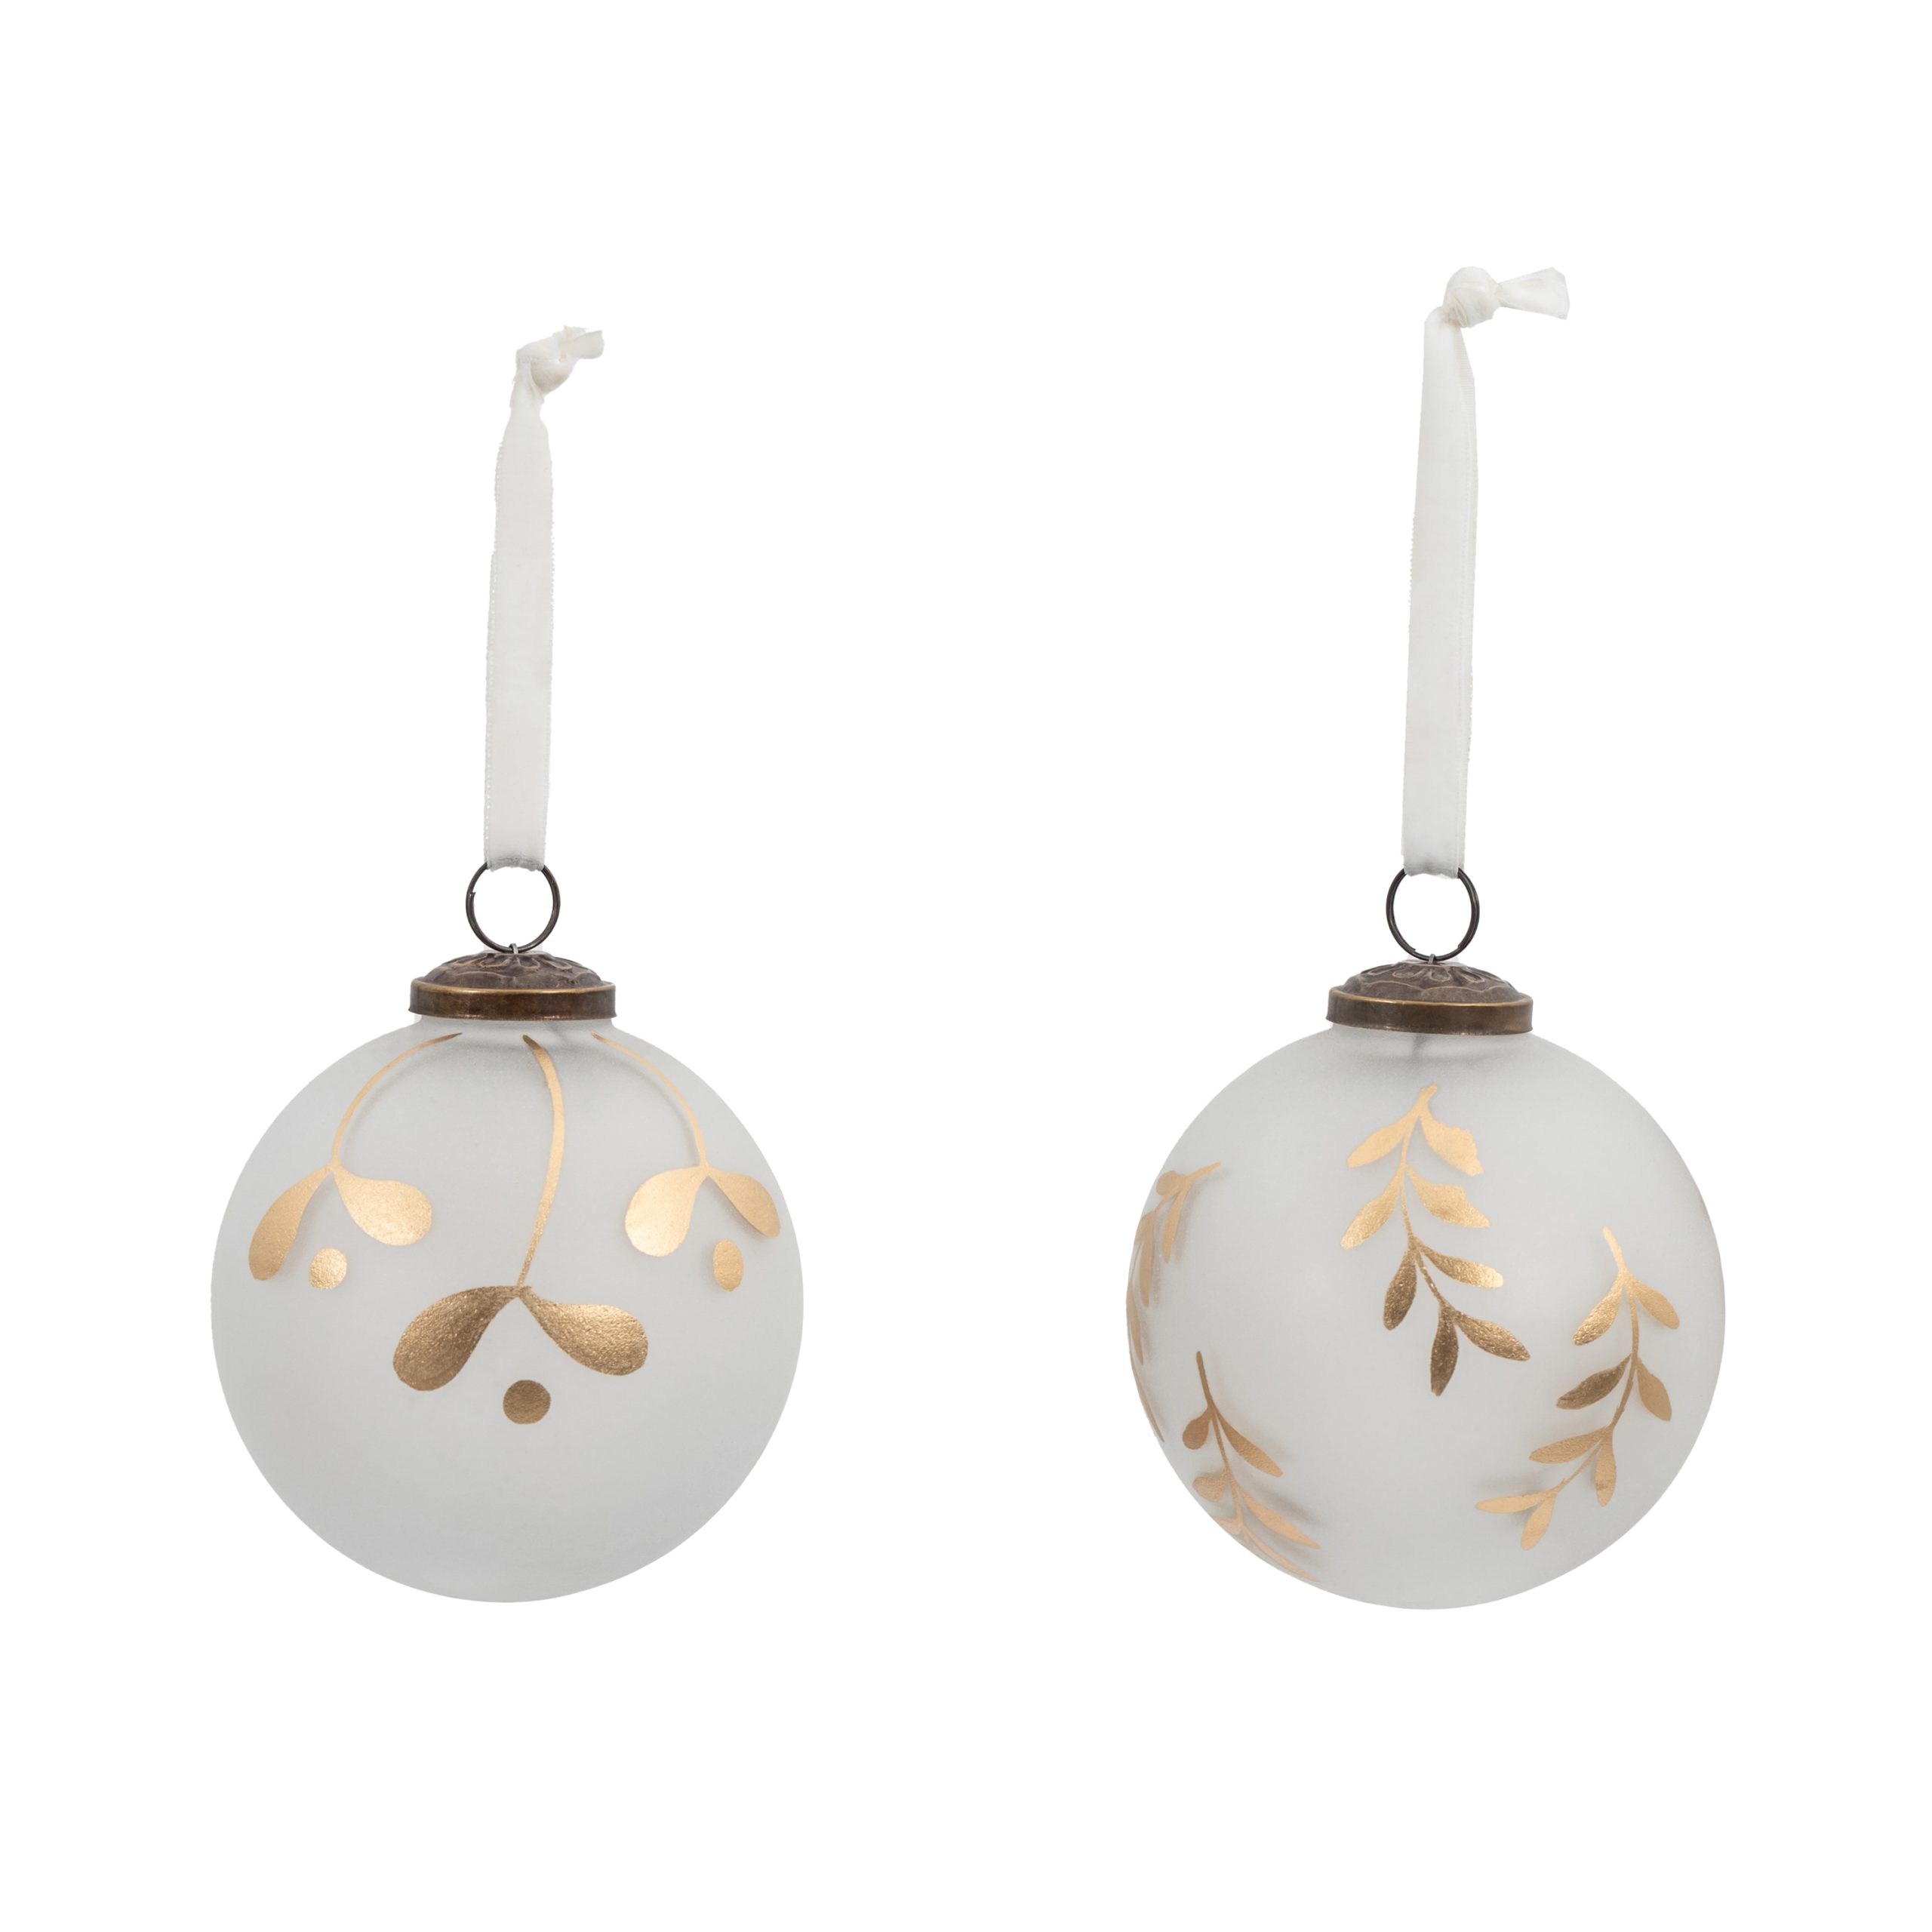 Gallery Direct Mistel Baubles White Gold (Set of 4